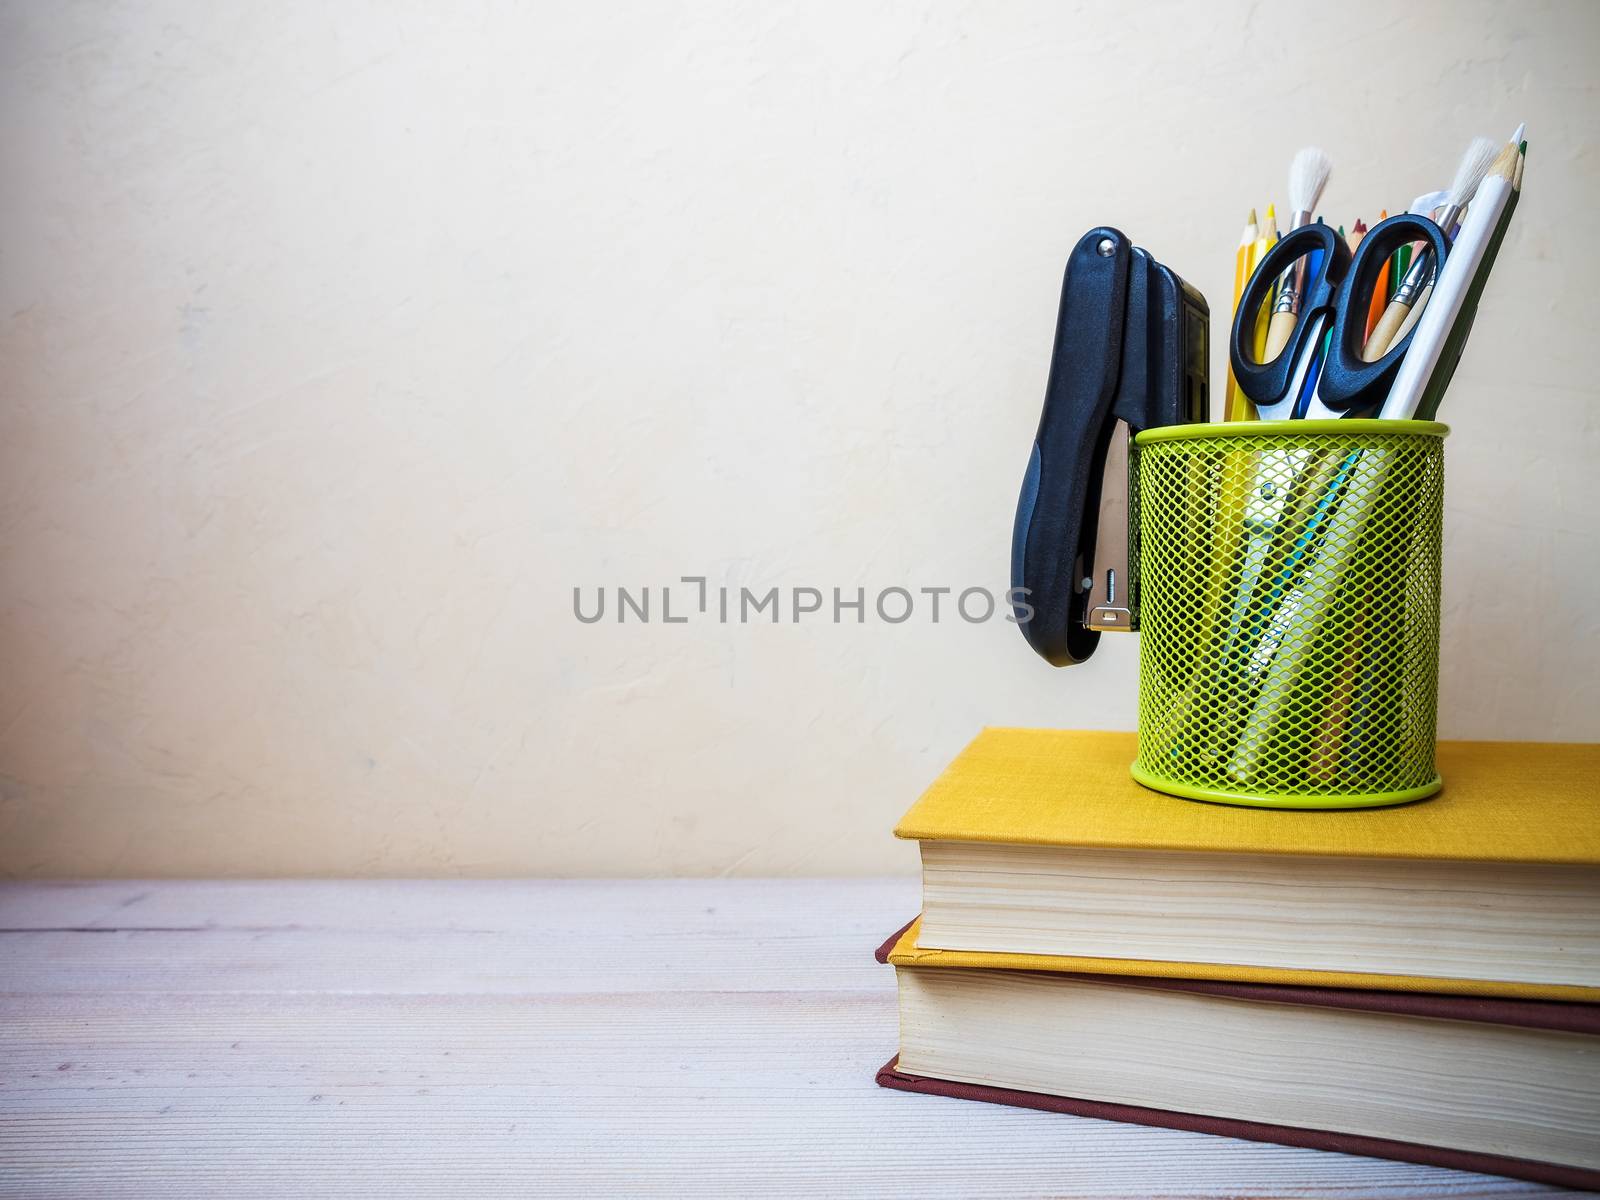 View on the pile of books and cup with pencils lying on the wooden table